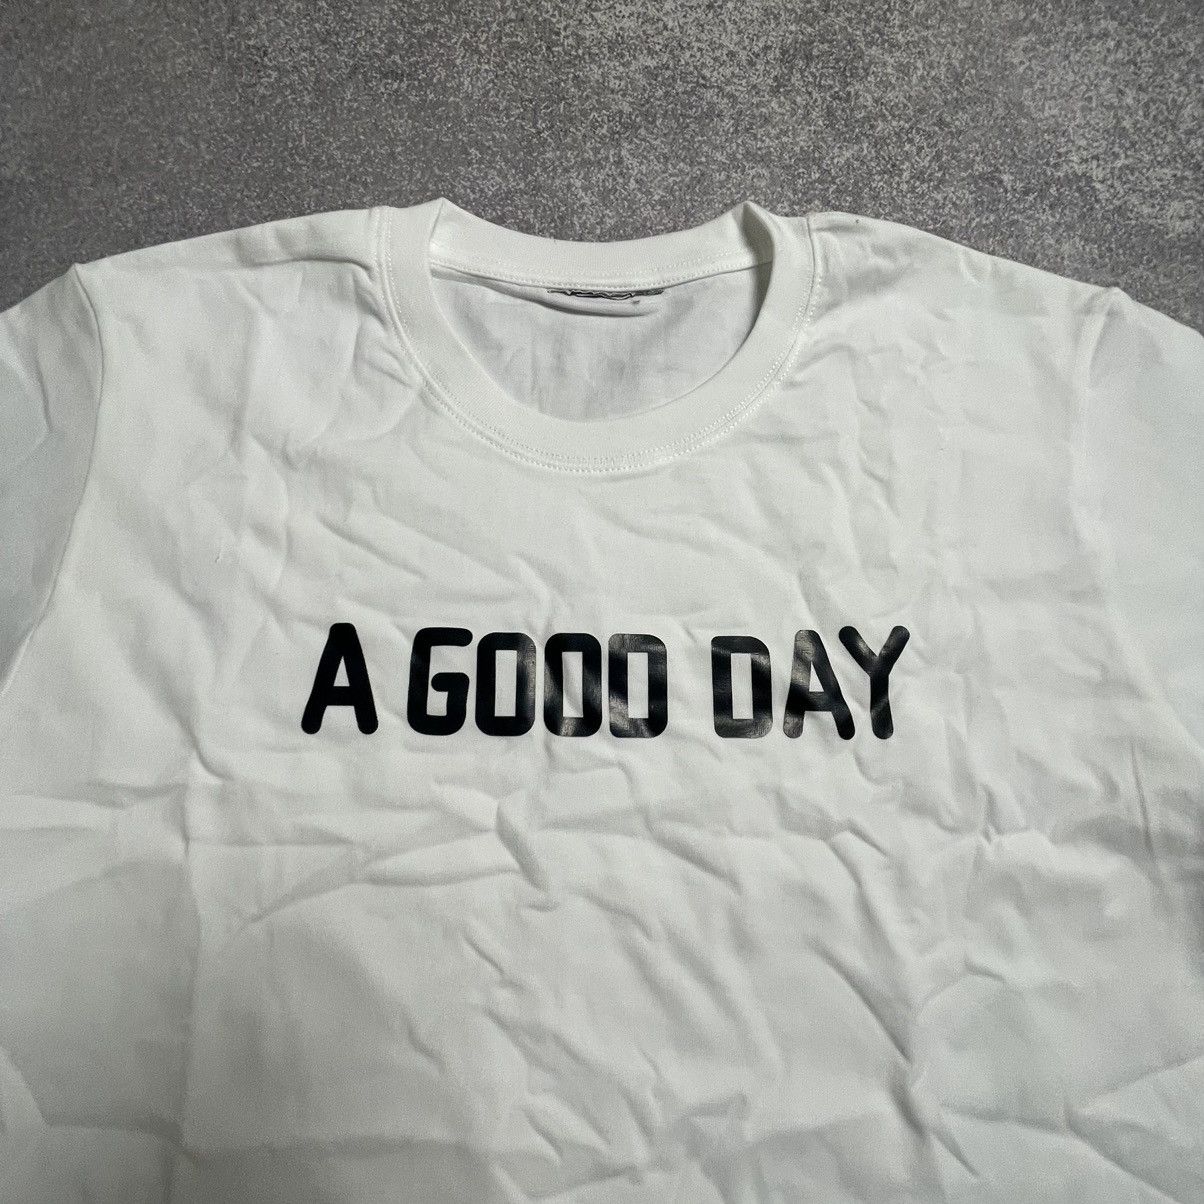 Pre-owned Humor X Hype Humor “what Is A Good Day?” Adult Y2k Big Logo T Shirt In White